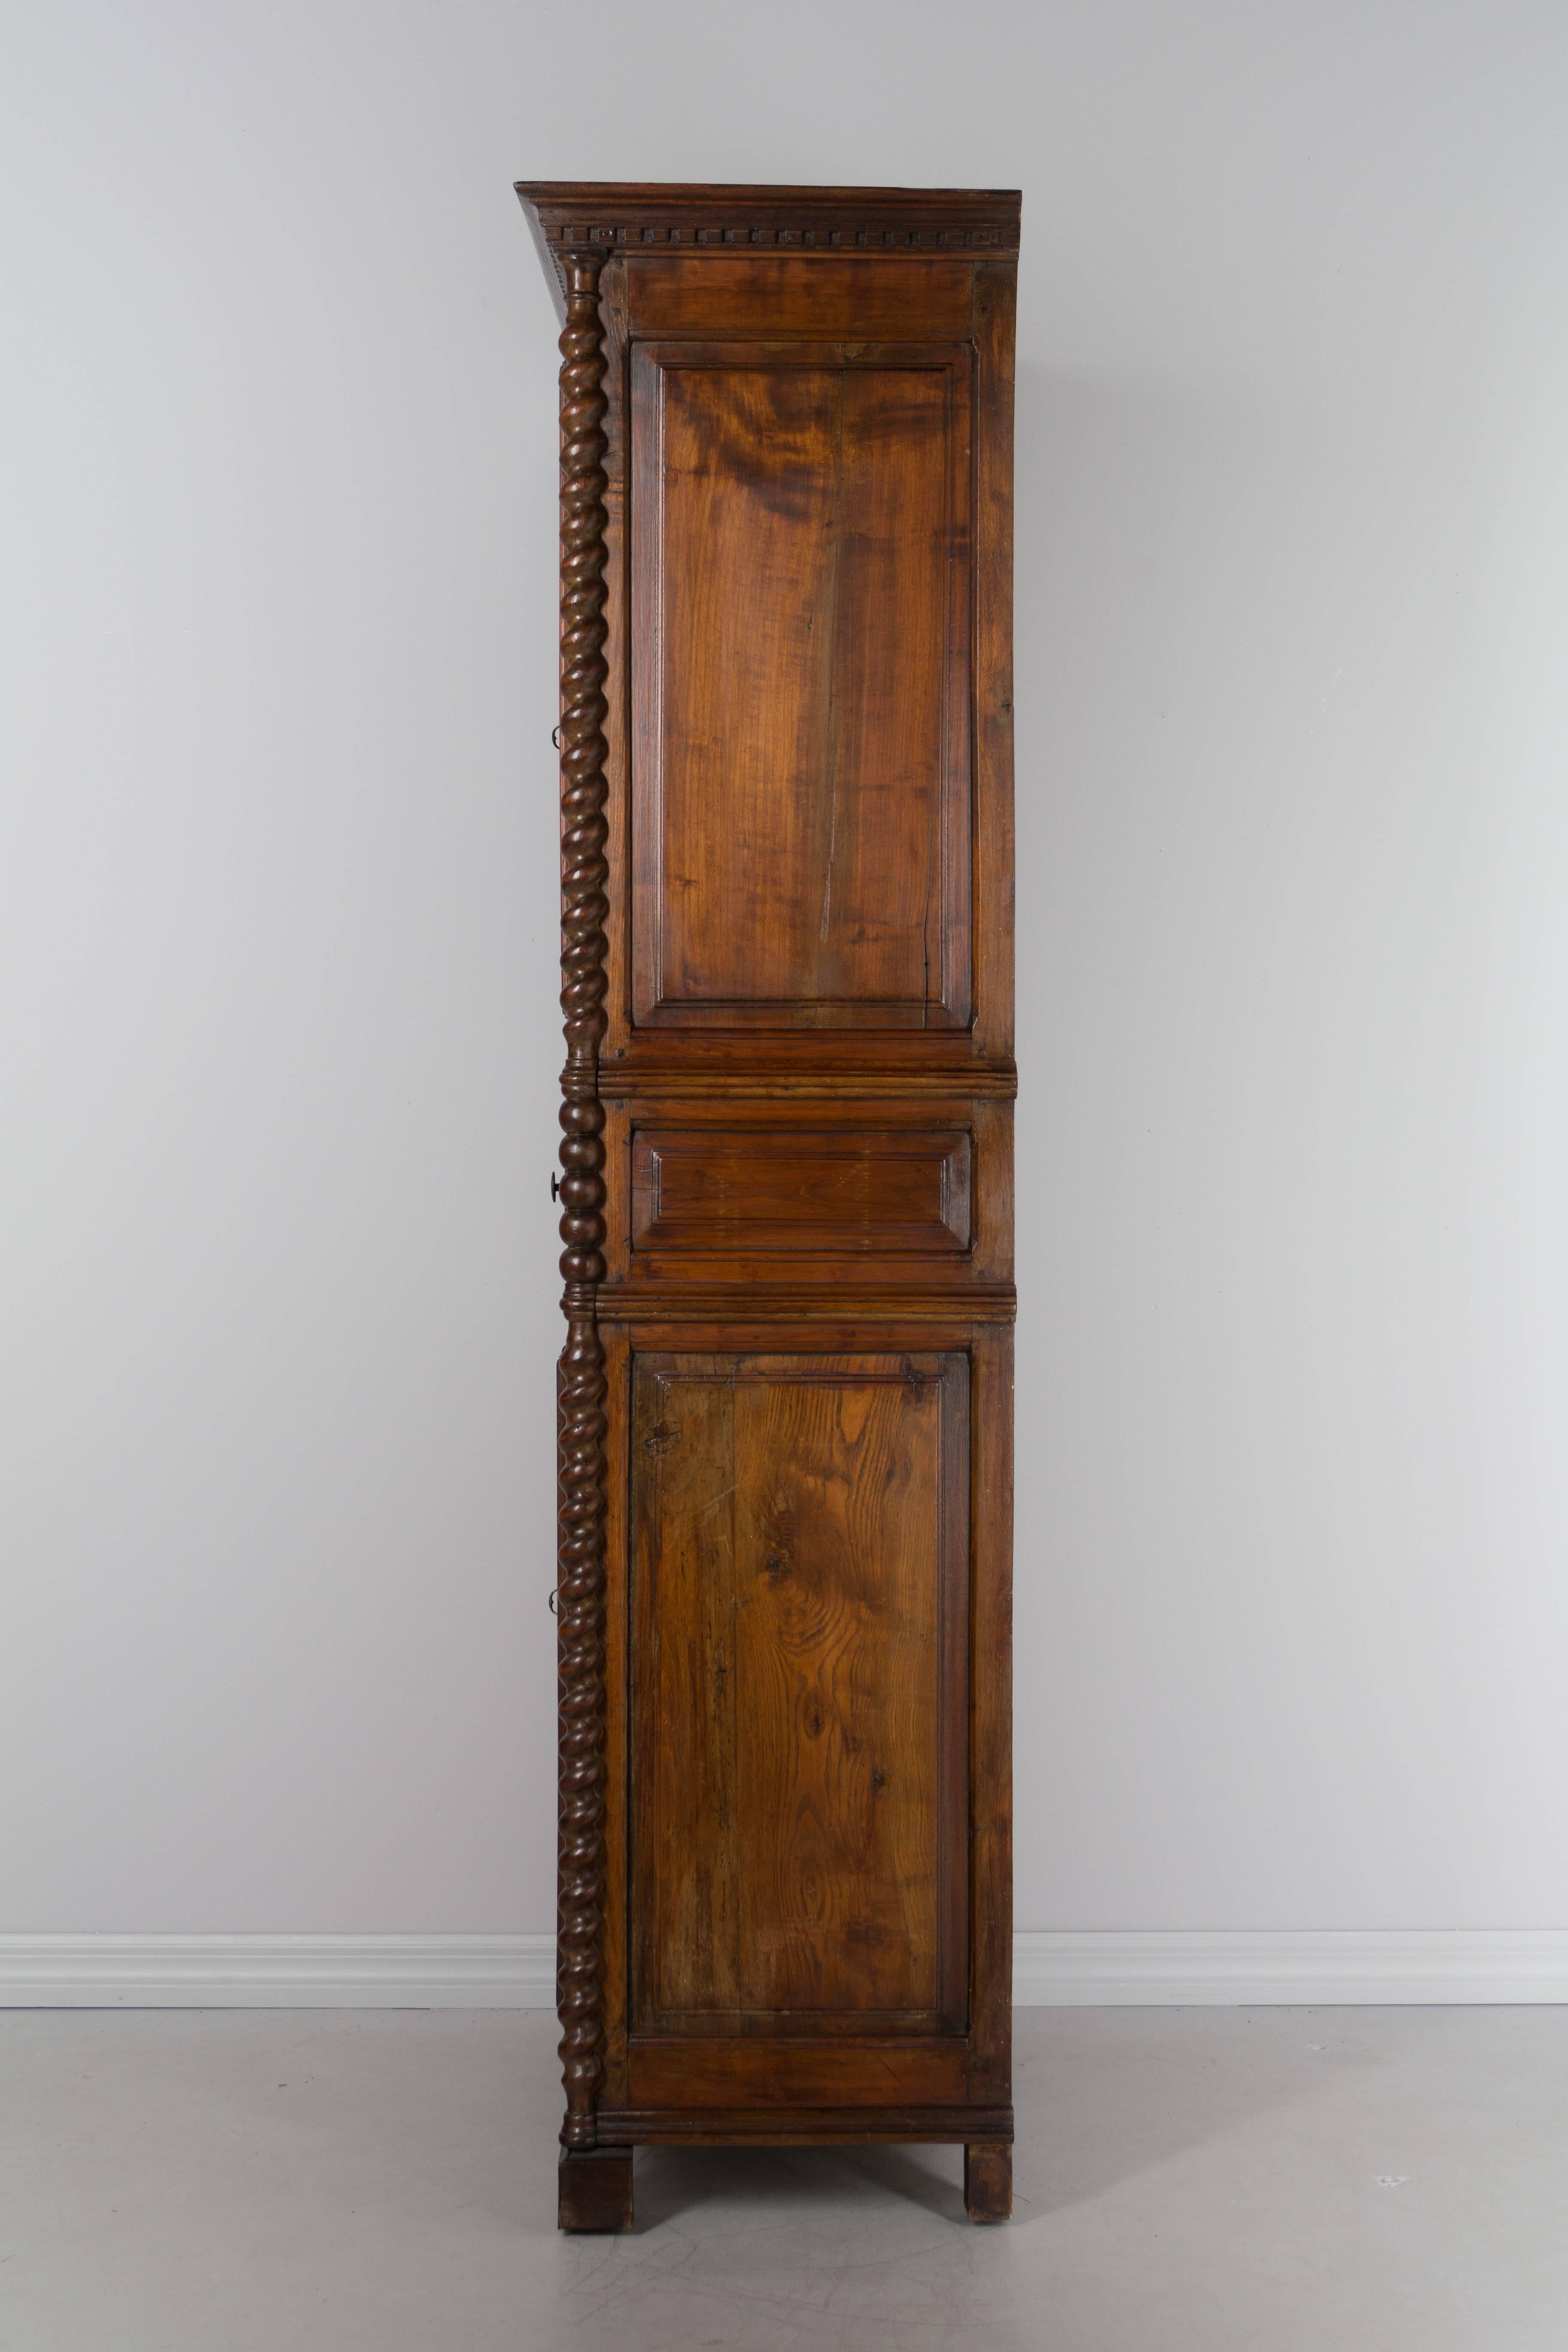 French 19th Century Louis XIV Style Homme Debout or Armoire